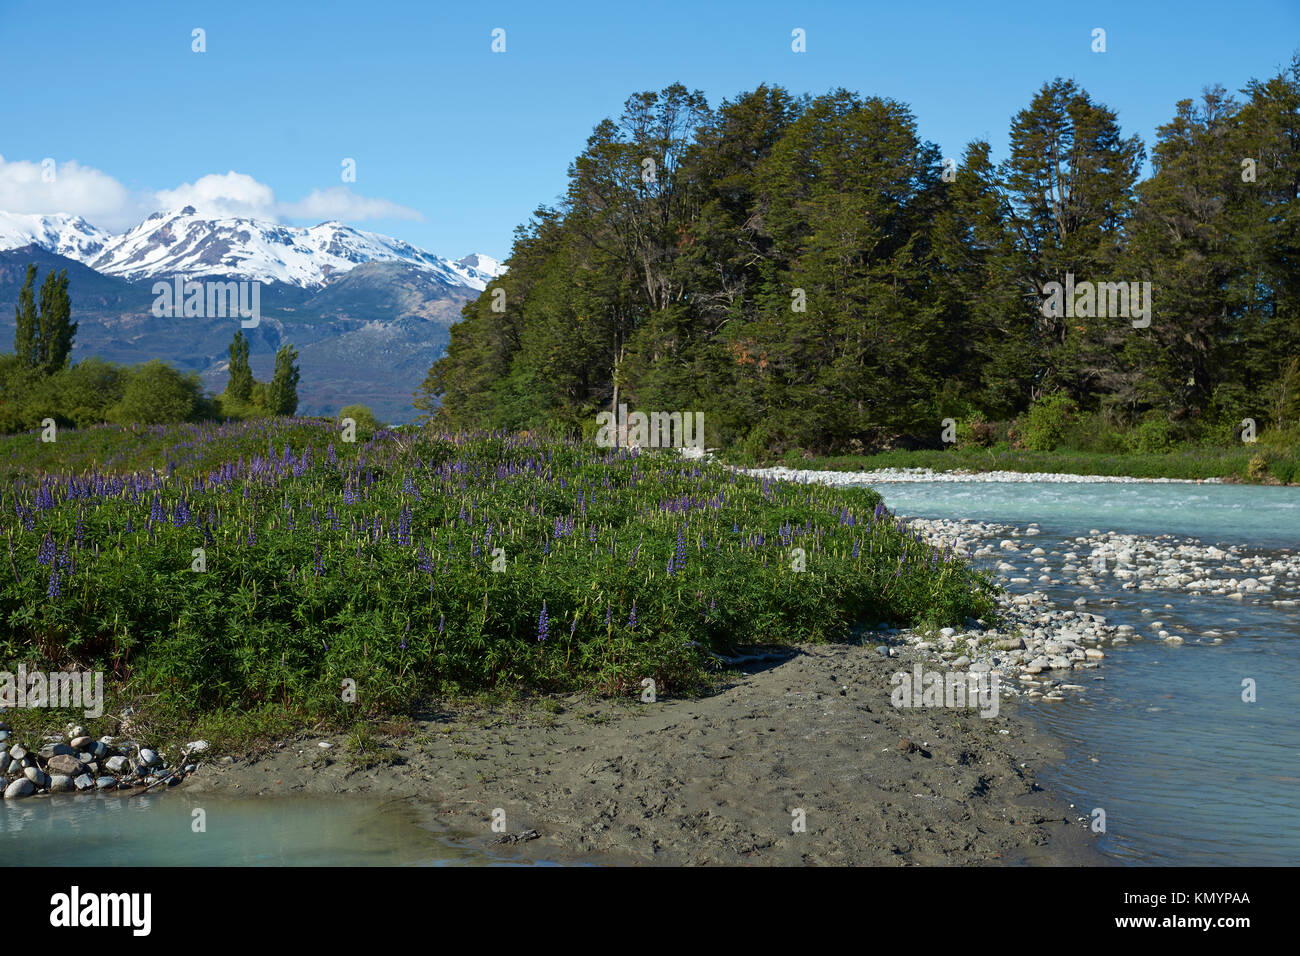 Spring in Patagonia. Lupins flowering on the banks of the Rio el Canal along the Carretera Austral in southern Chile. Stock Photo